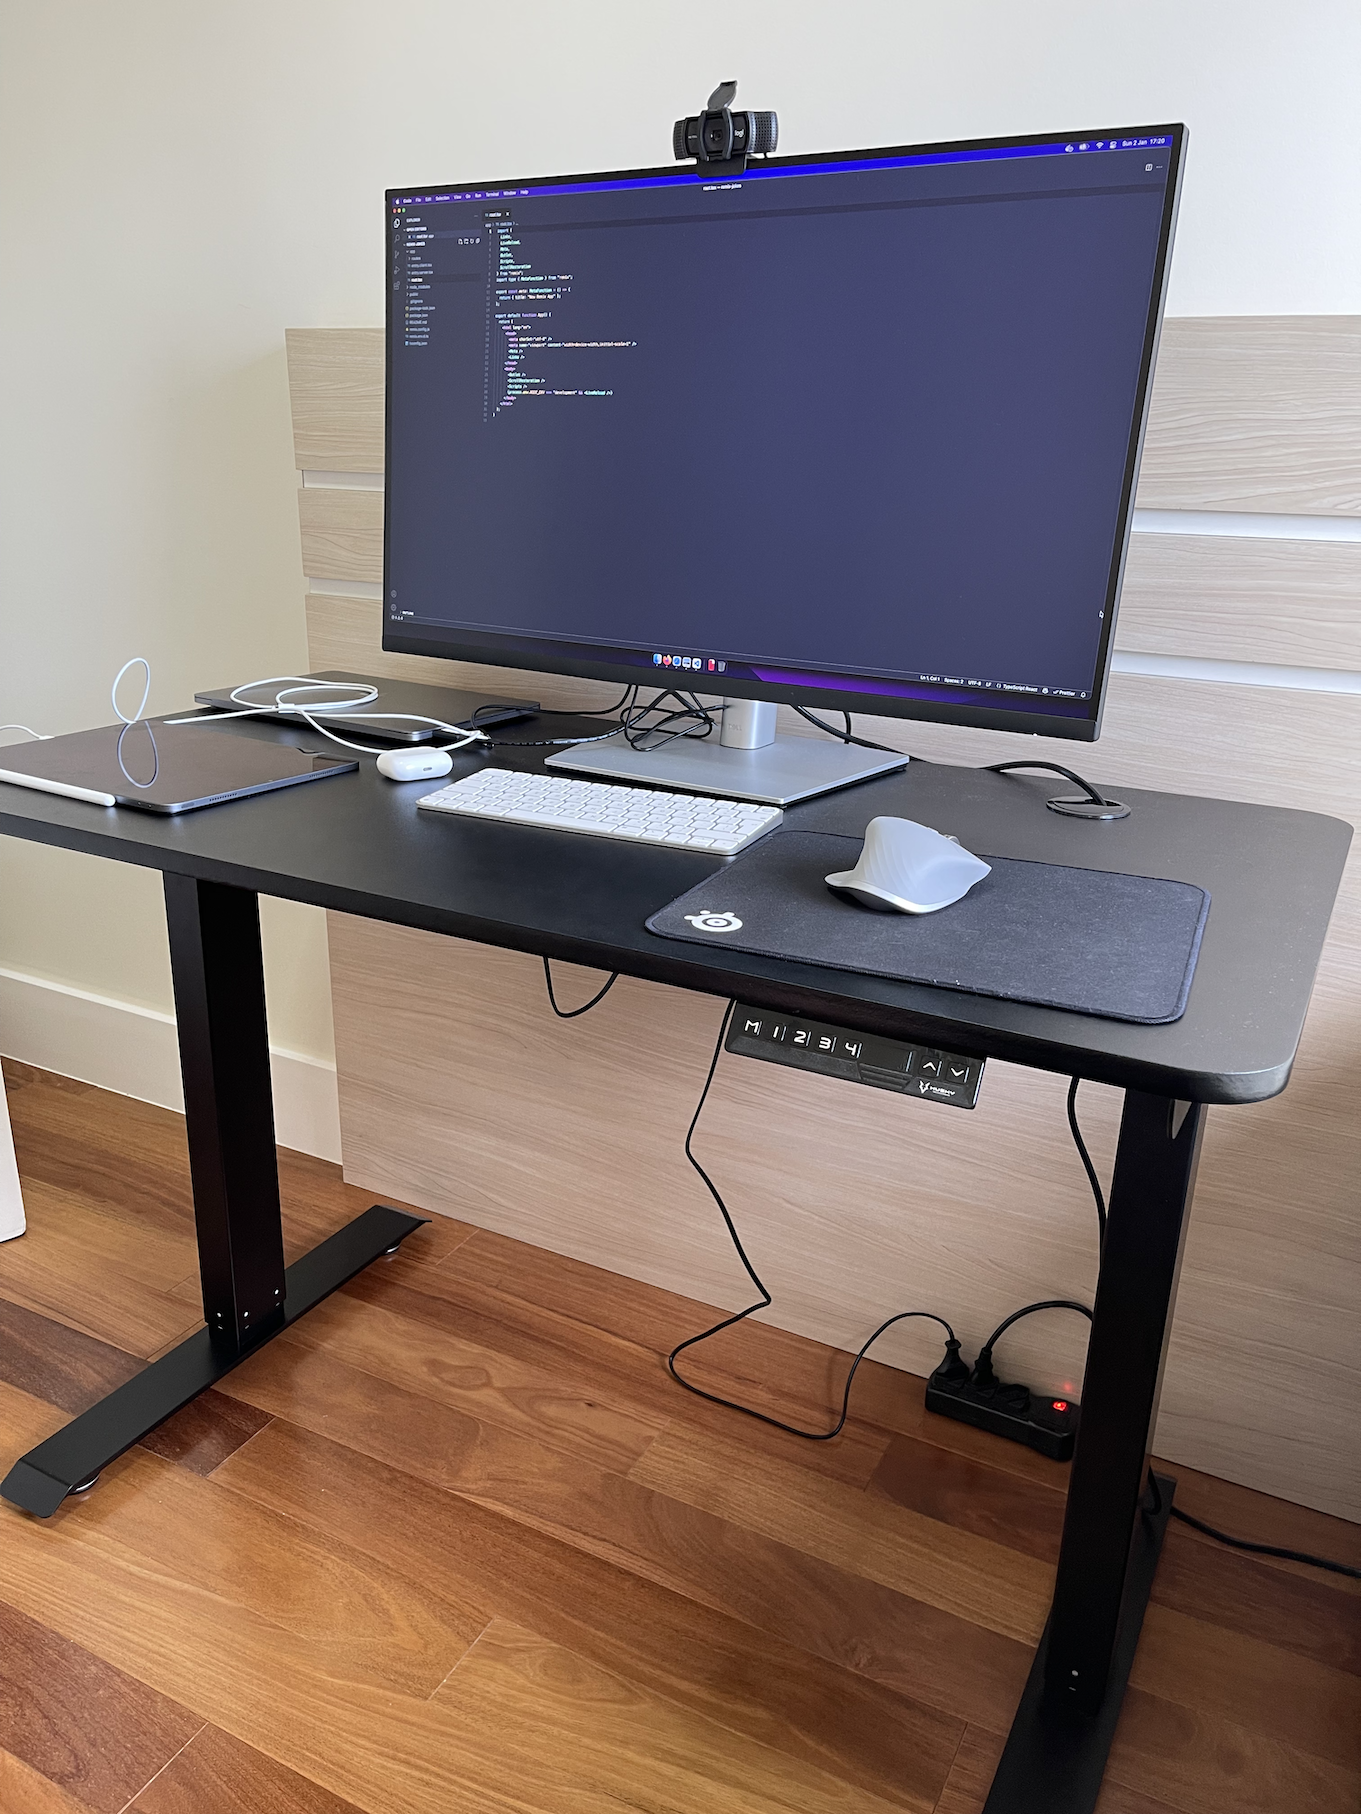 Home office setup with a standup table, laptop, and monitor